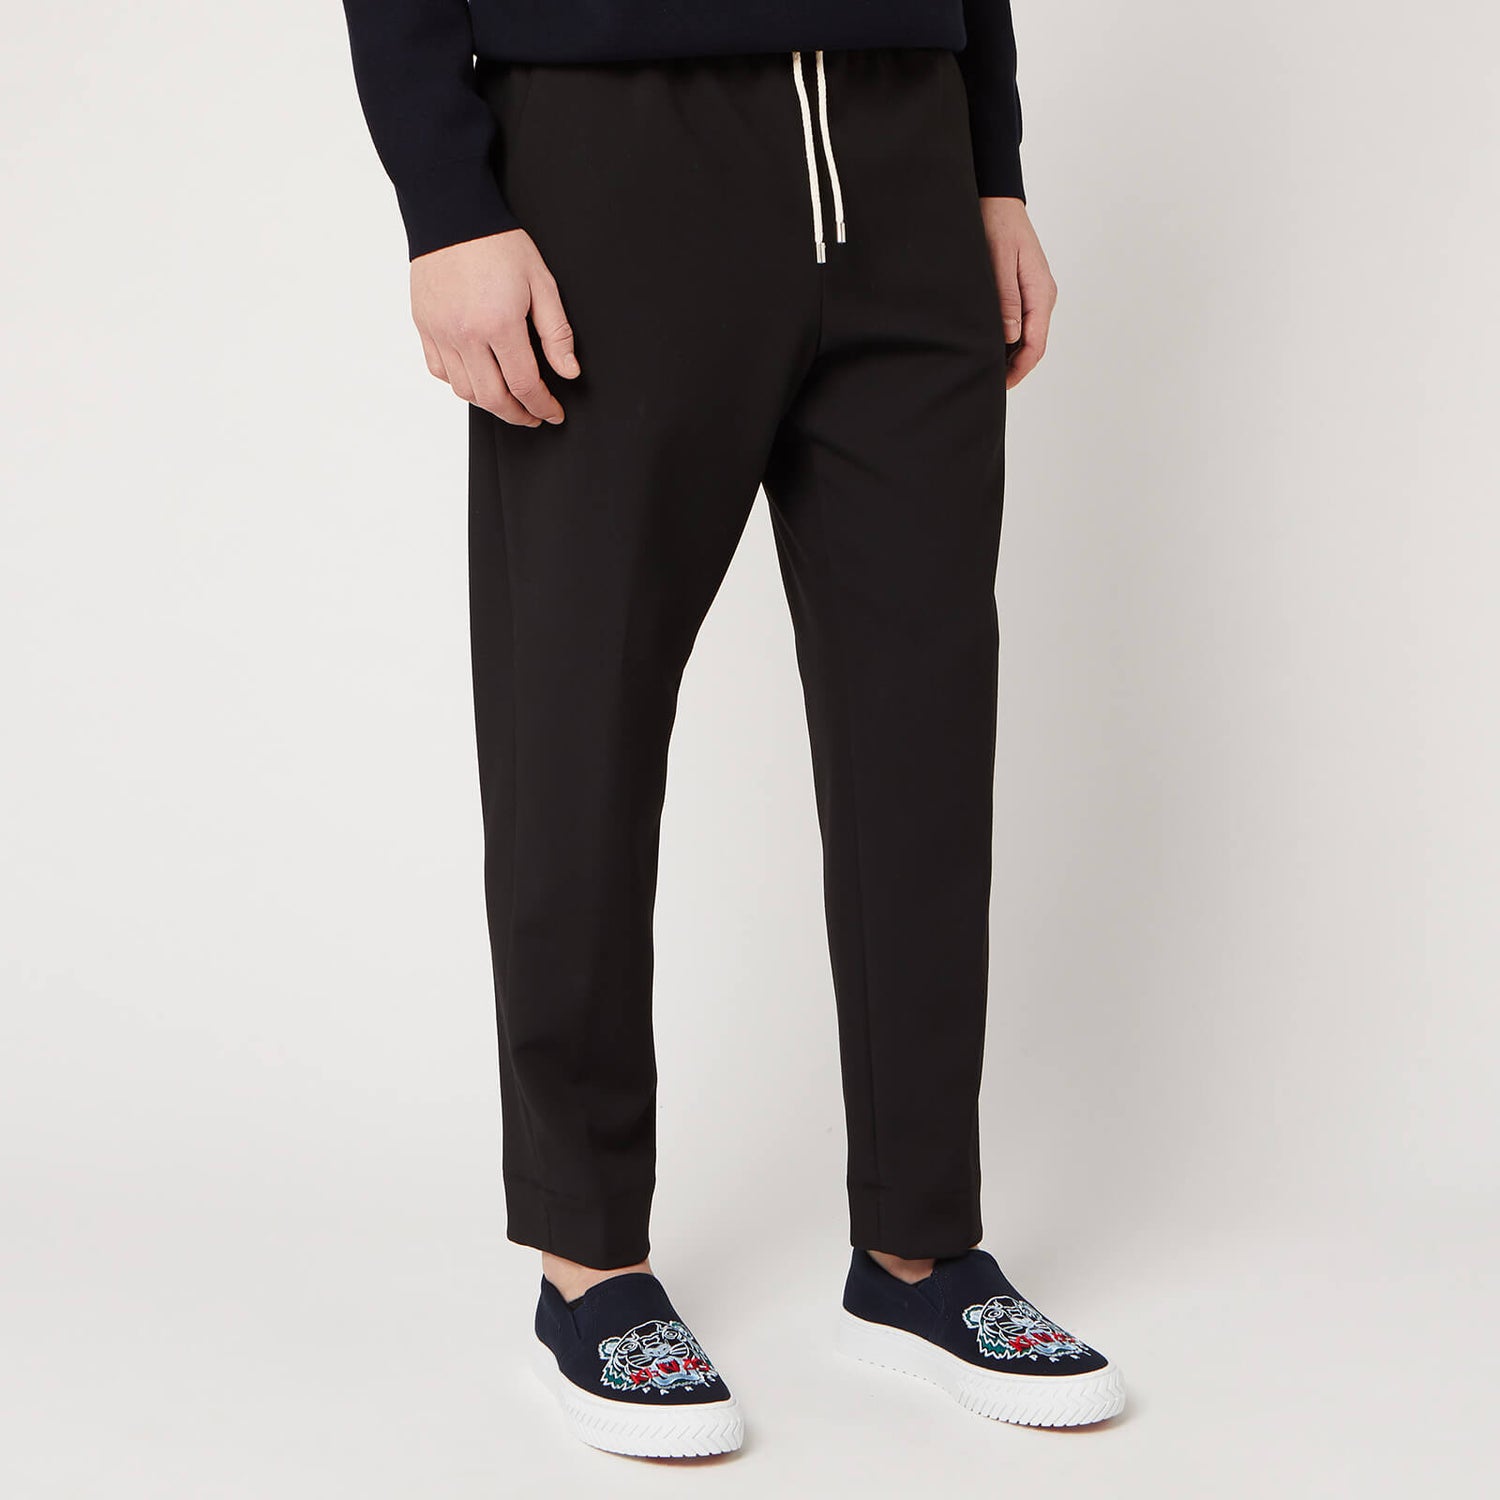 KENZO Men's Tapered Crop Pant - Black - Free UK Delivery Available